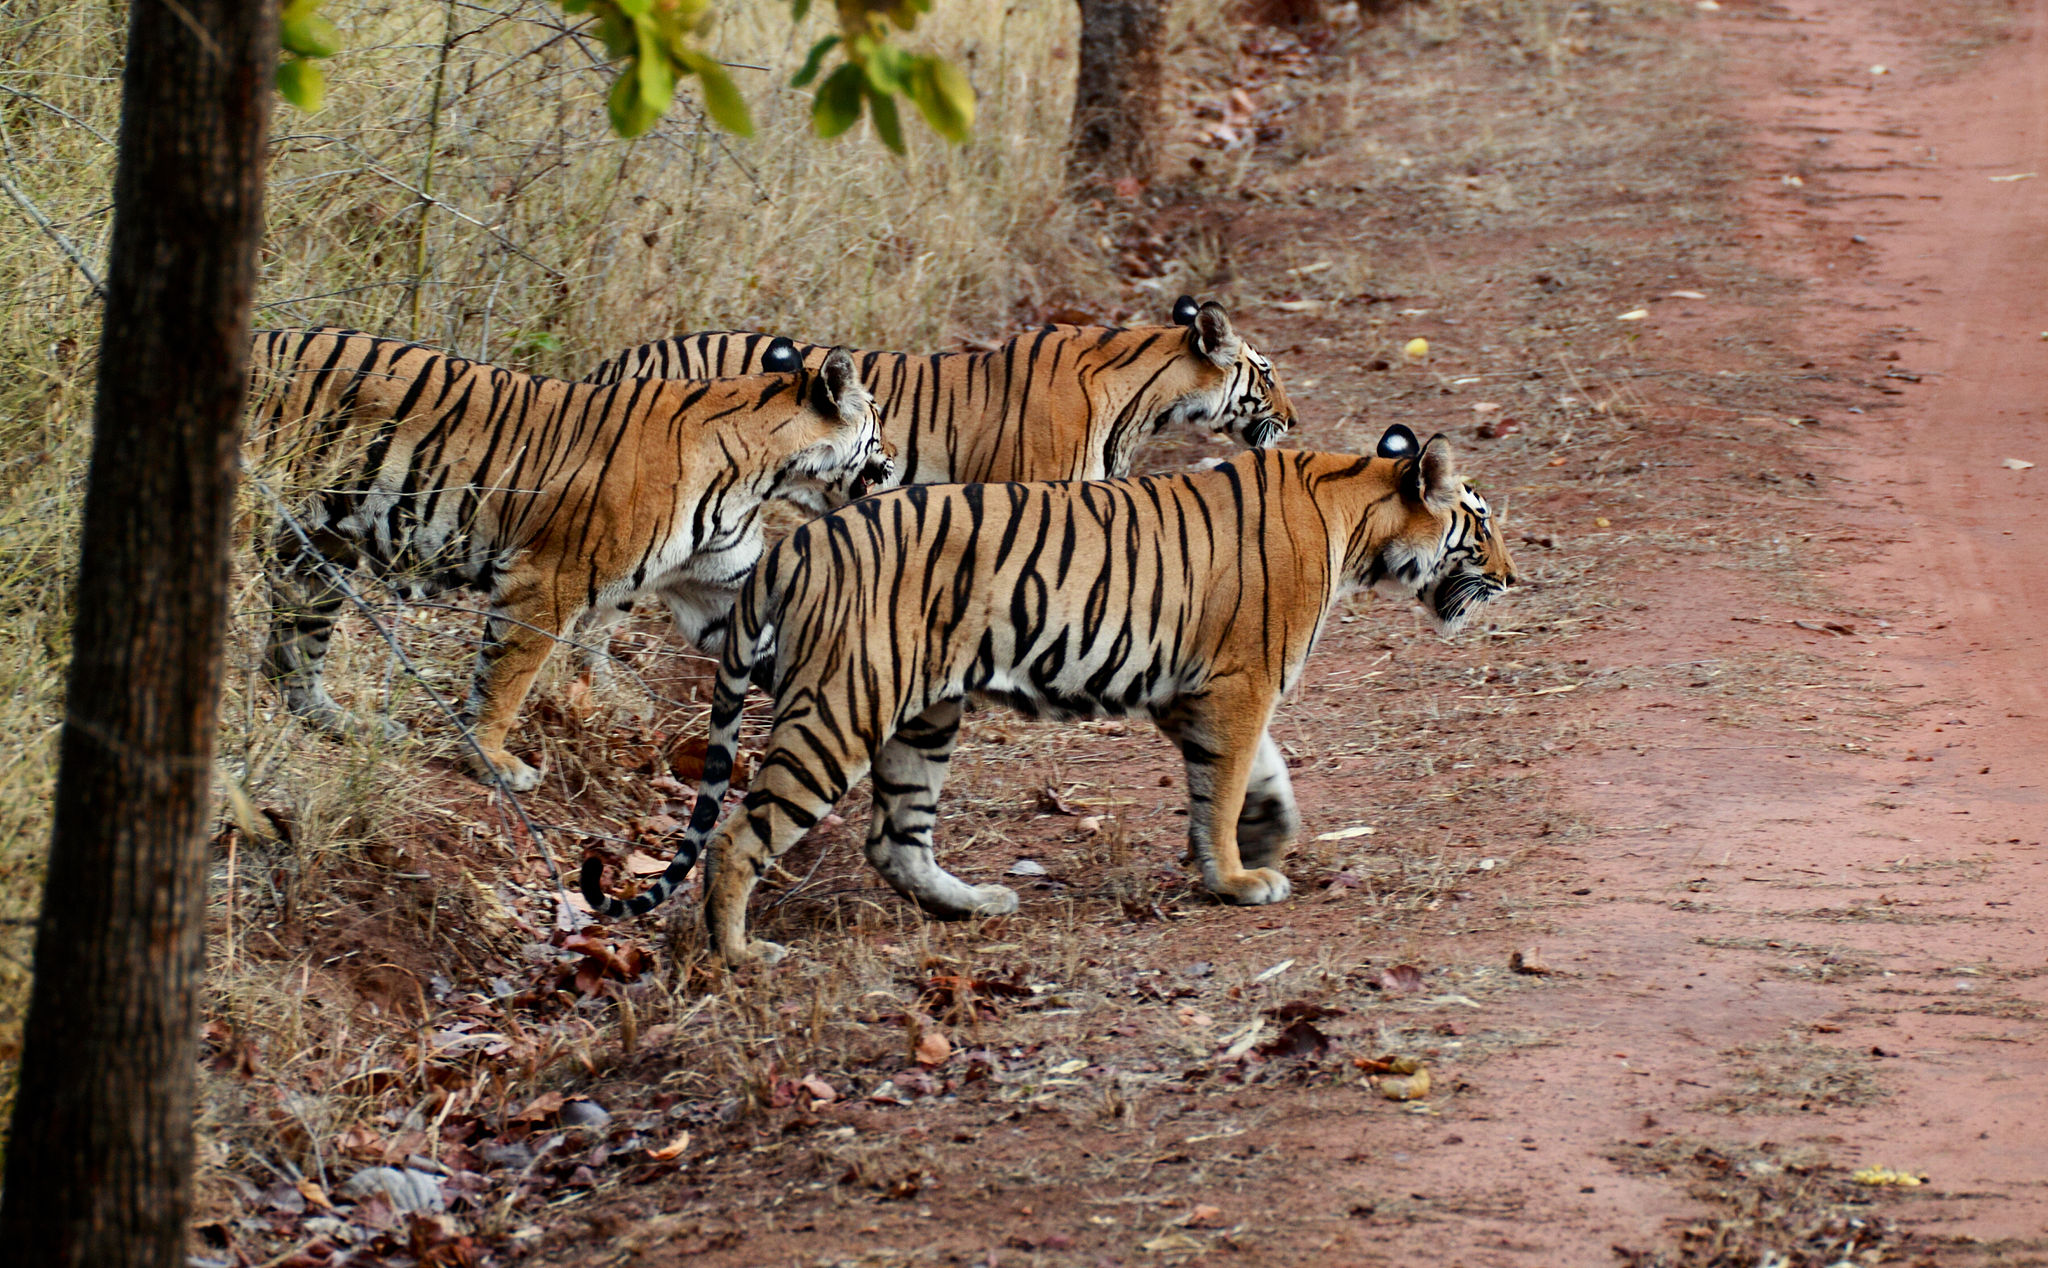 A Bengal tigress with her cubs in Bandhavgarh National Park, India/ Photo © Brian Gratwick/Wikimedia Commons